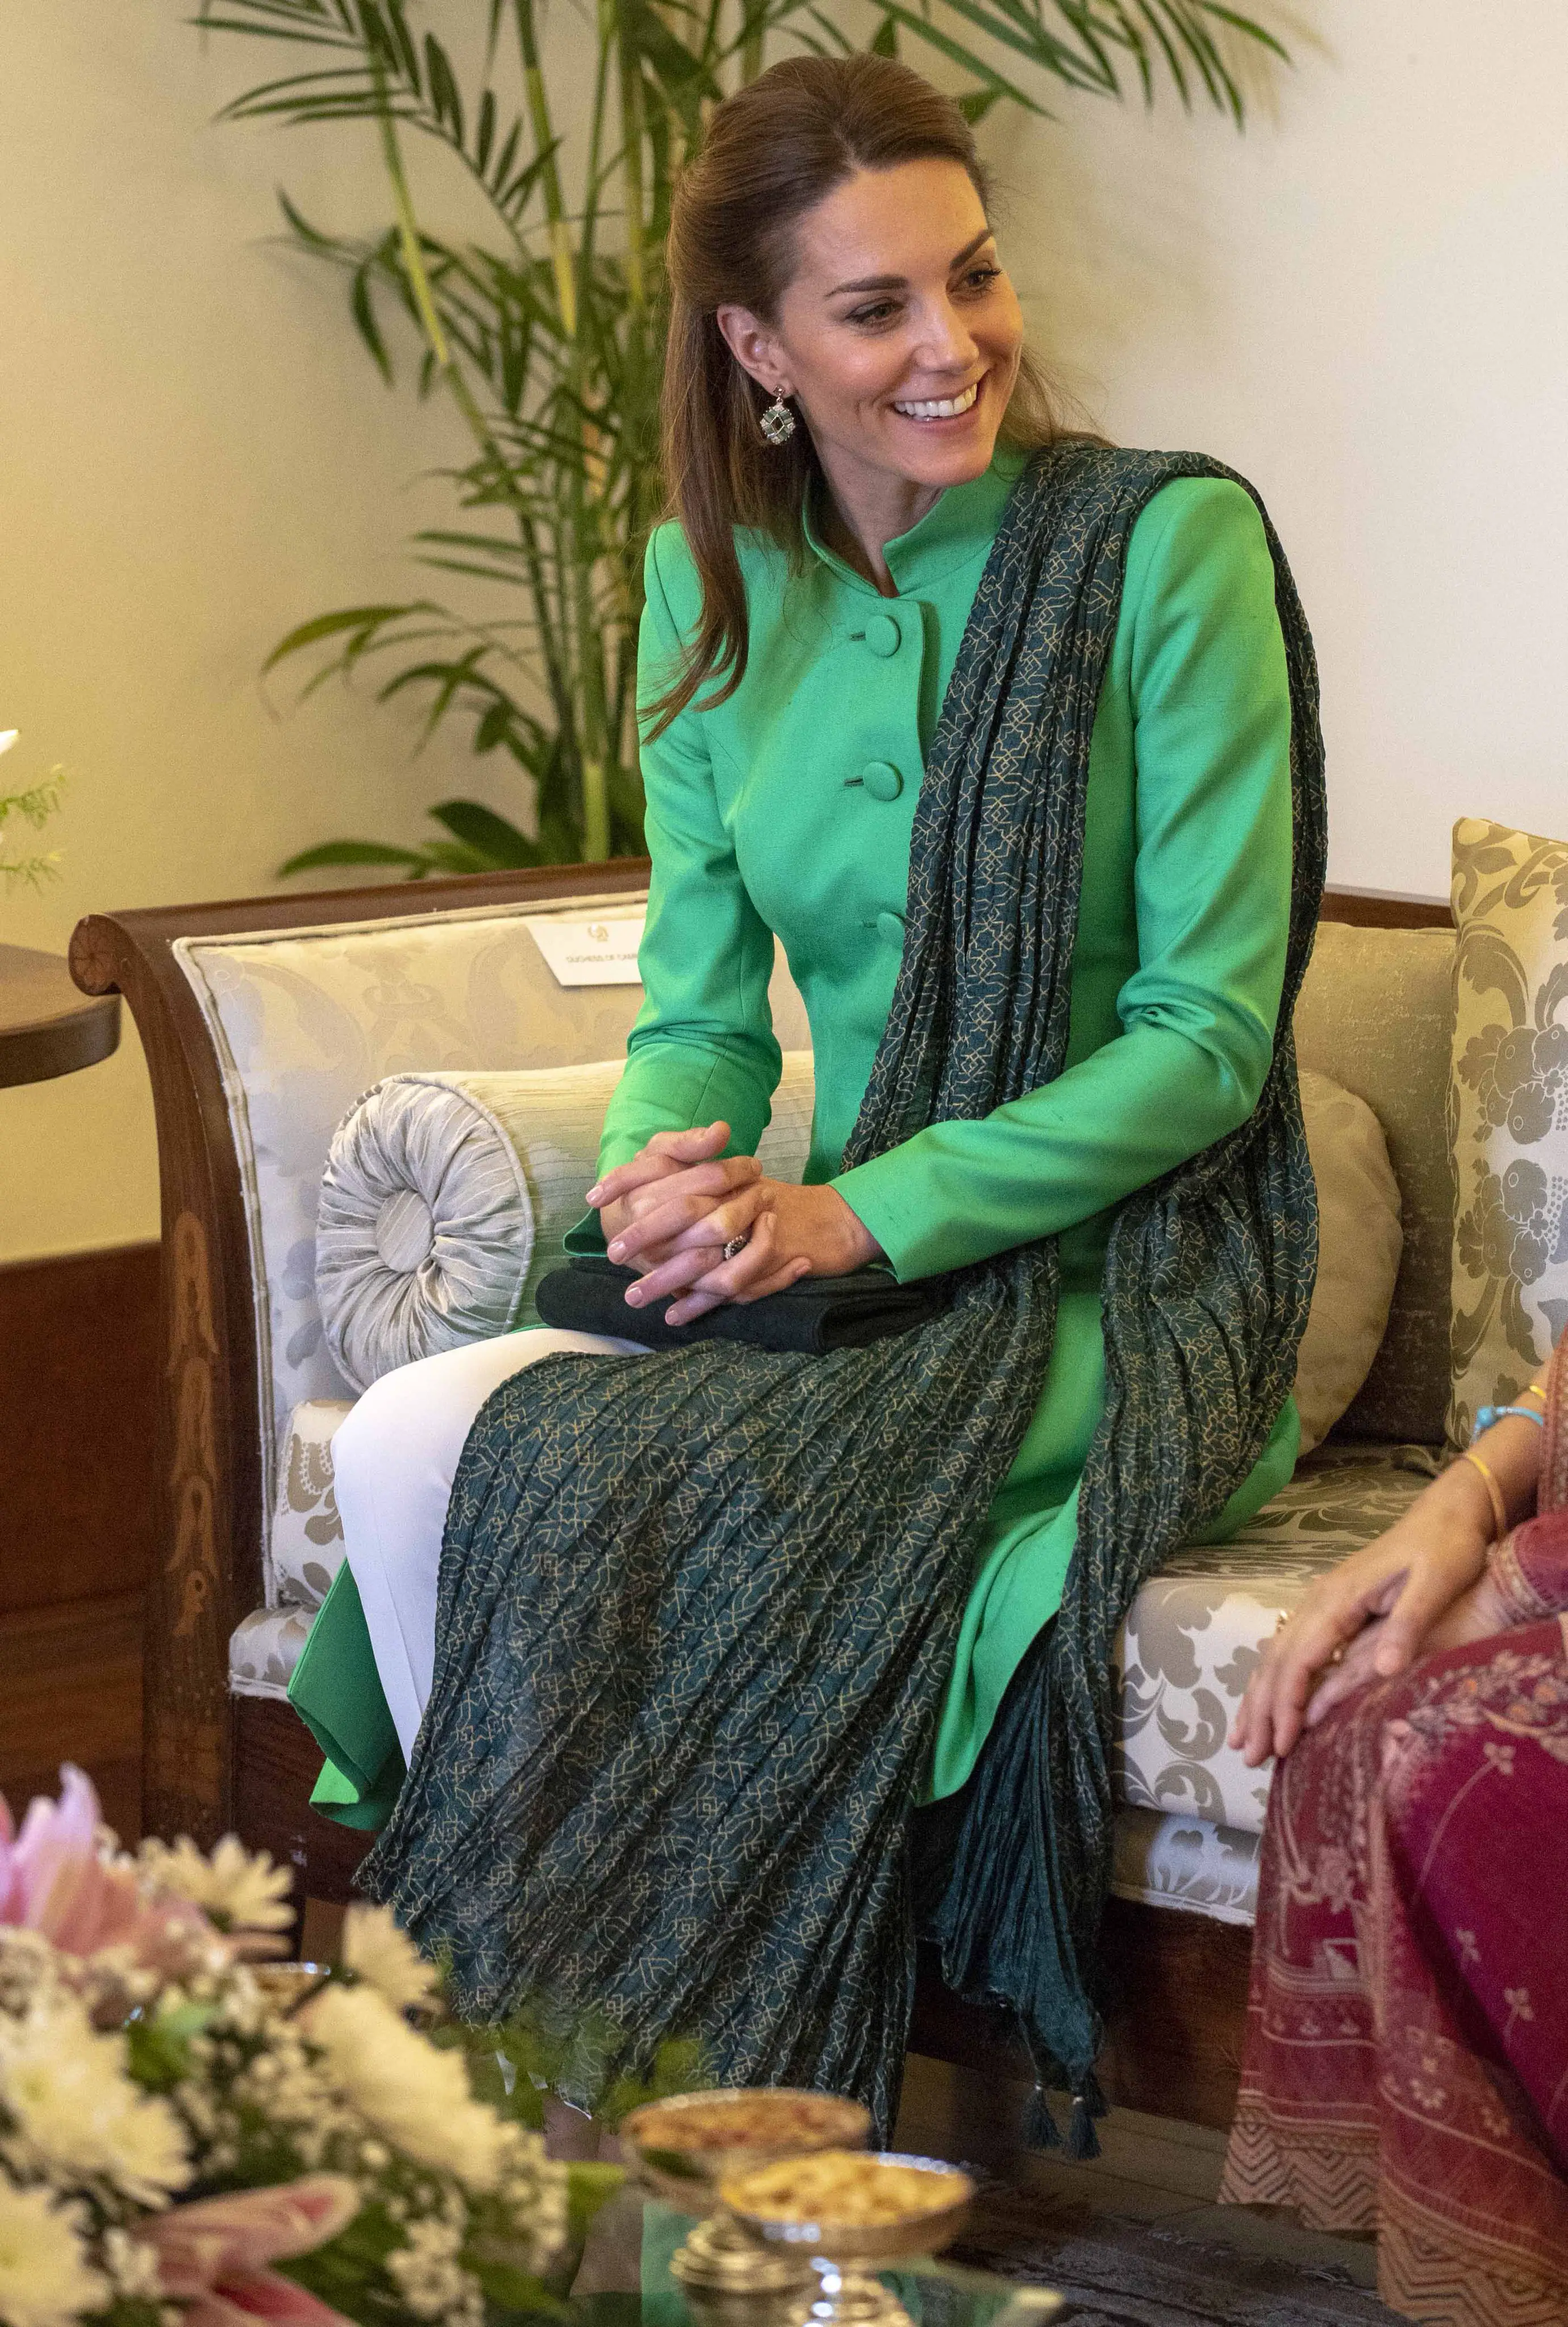 The Duchess of Cambridge wore green Catherine Walker Tunic with white trouser to meet Imran Khan during Pakistan visit